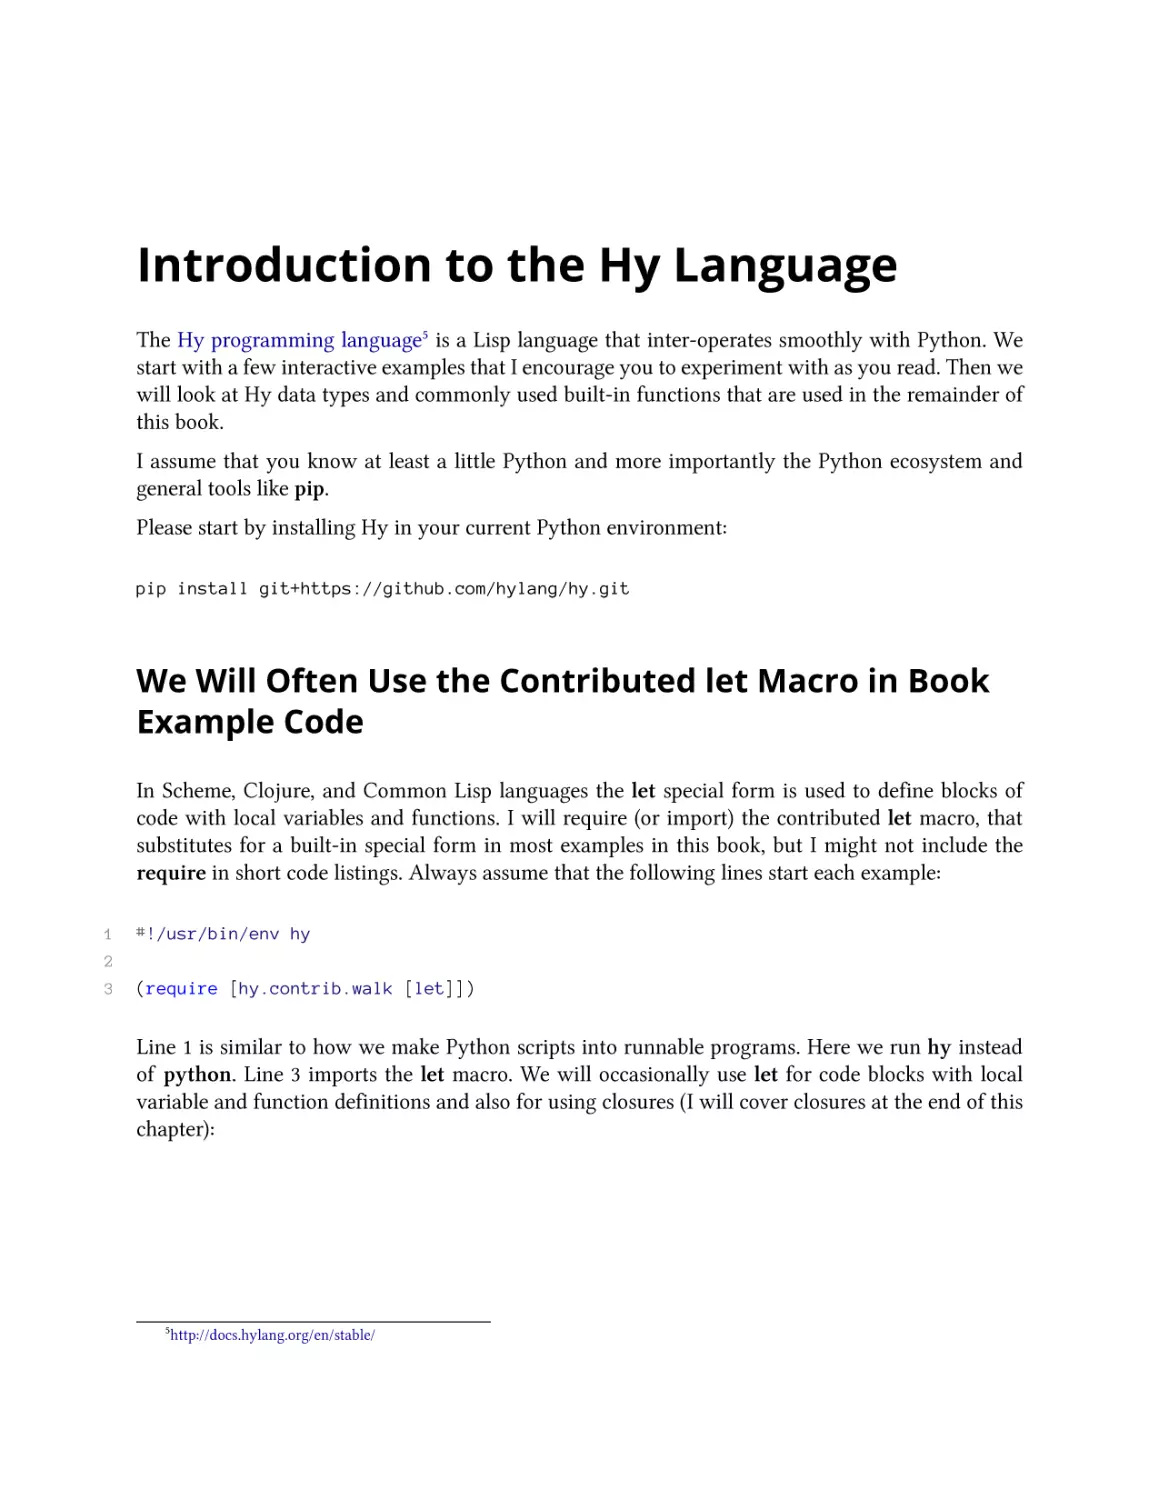 Introduction to the Hy Language
We Will Often Use the Contributed let Macro in Book Example Code